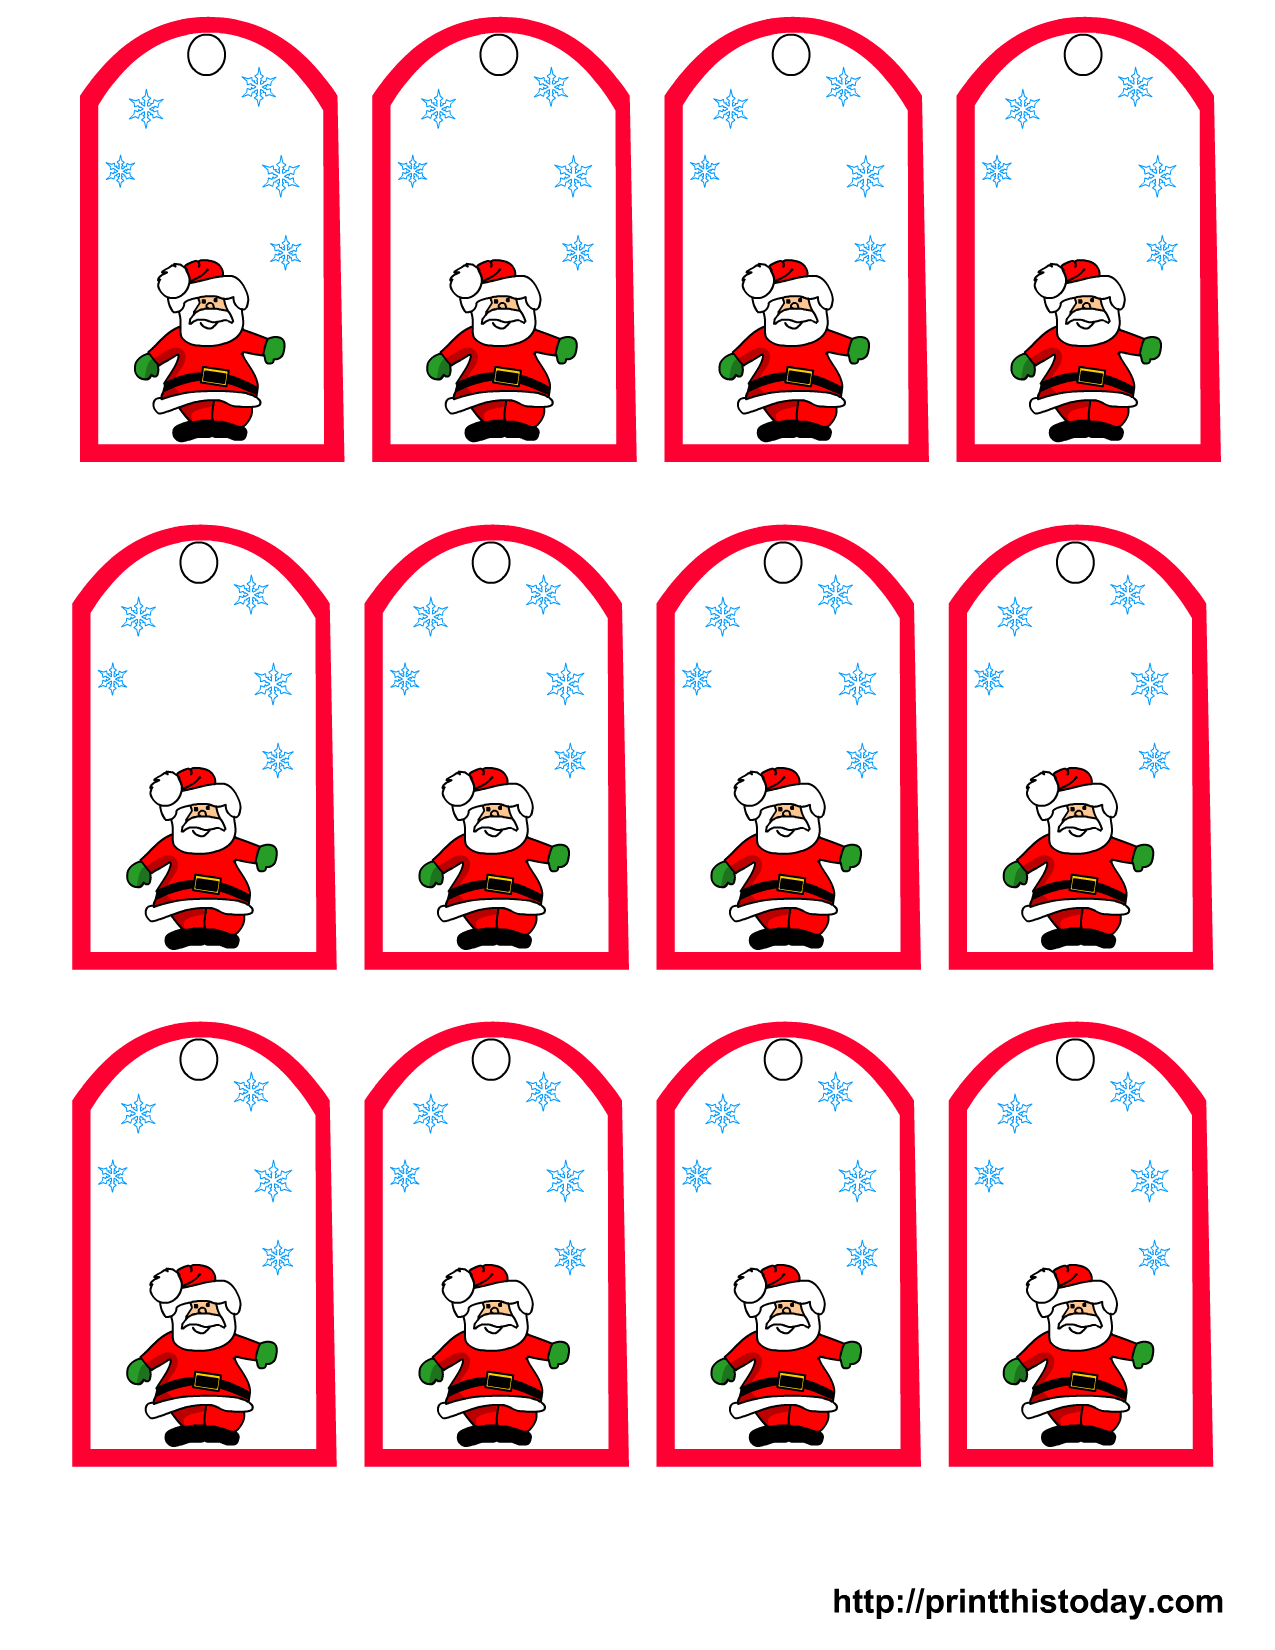 Printable Santa Claus Christmas Gift Tags from Print This Today